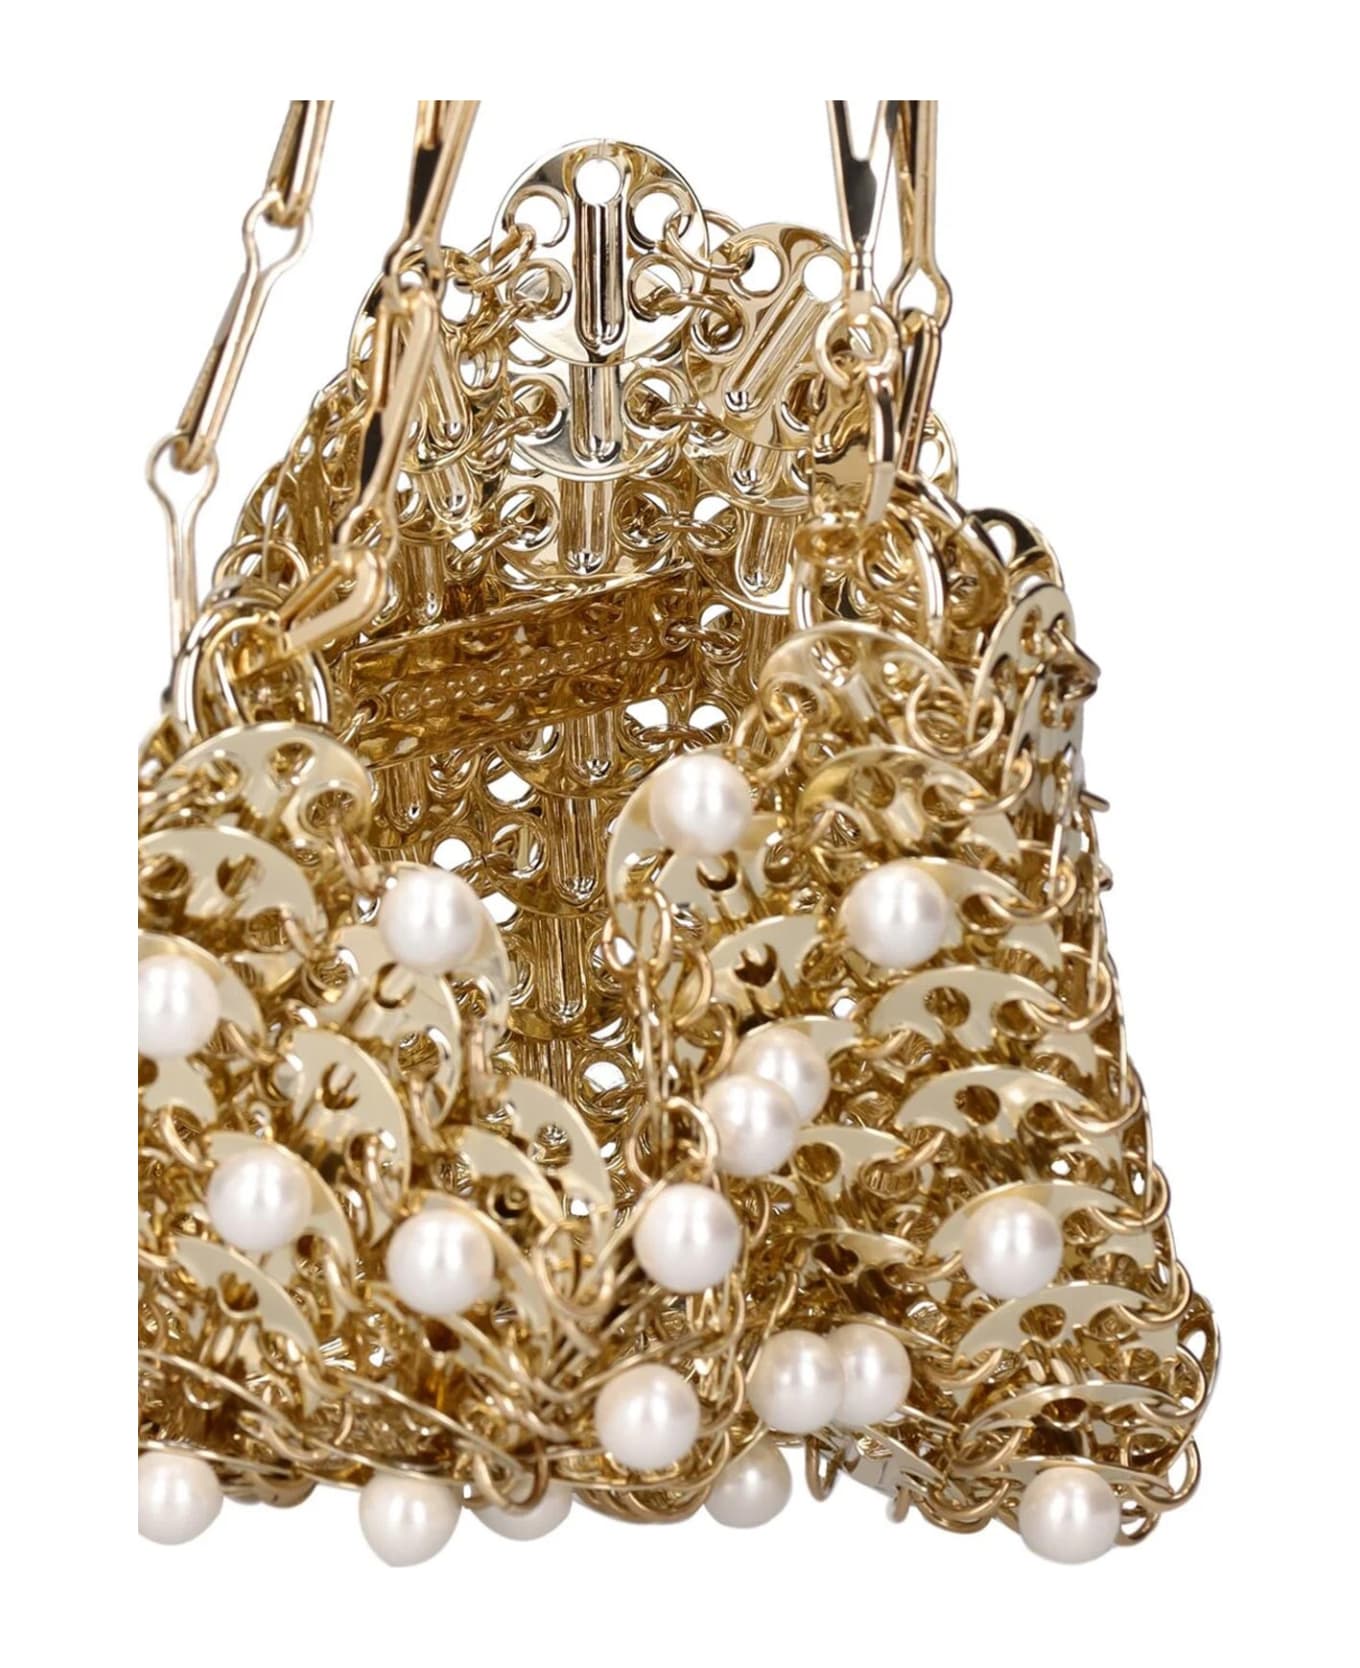 Paco Rabanne Gold And Pearls 1969 Nano Bag - Light Gold Pearl